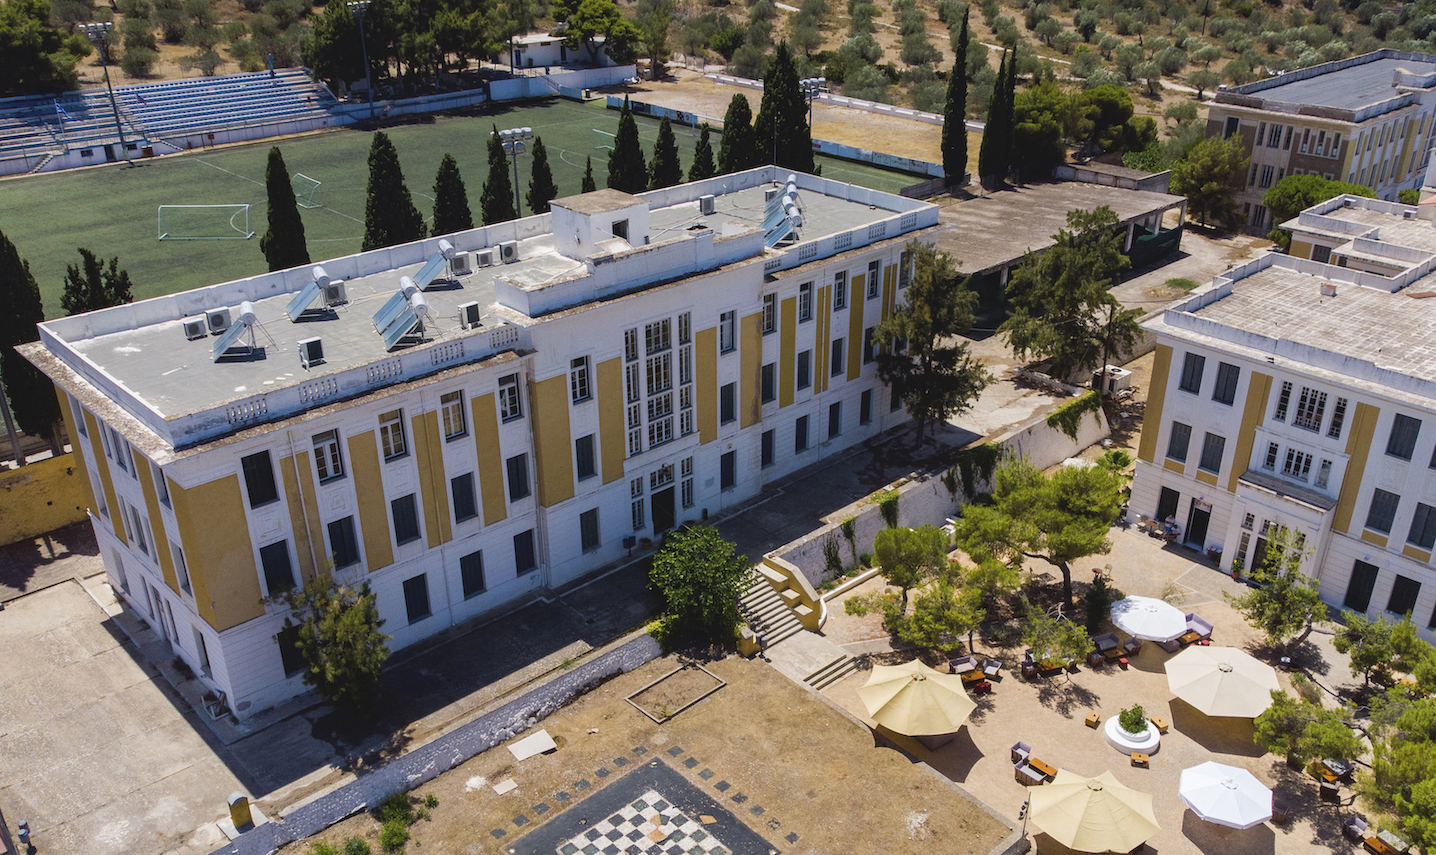 Academic Camp Greece for students aged 12-17 on the island of Spetses